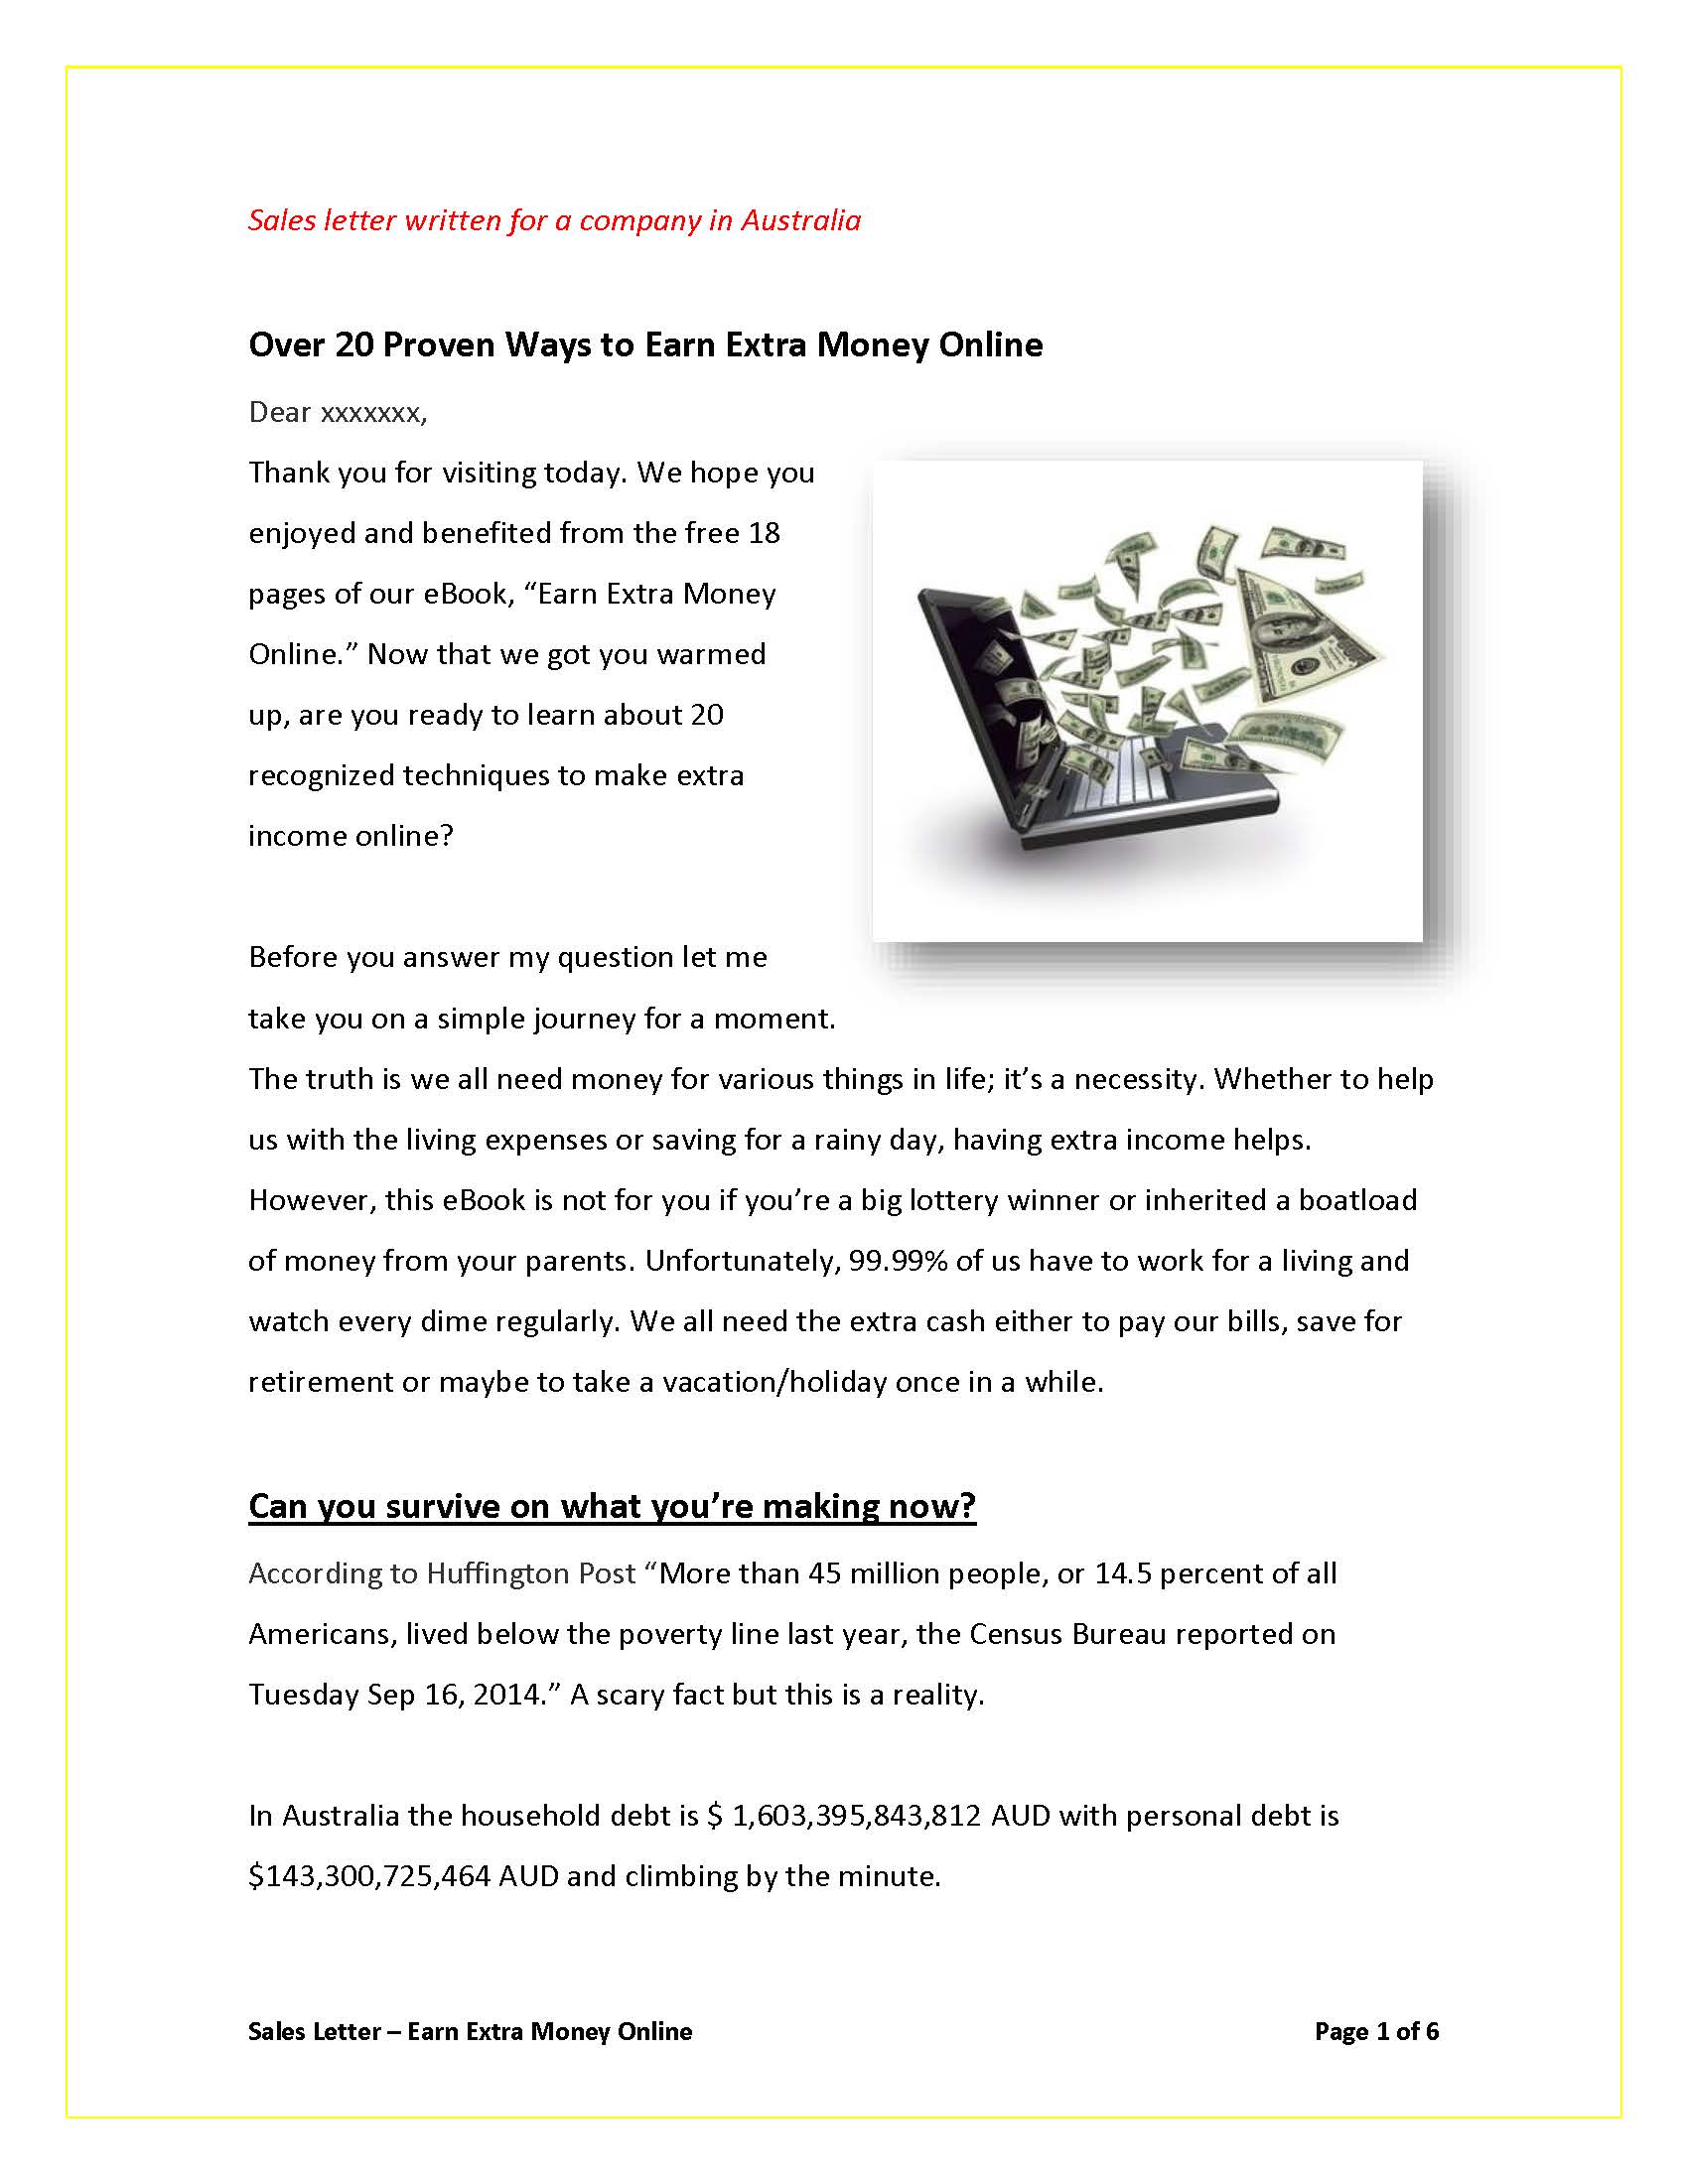 Sales Letter - How To Earn Money Online_Page_1